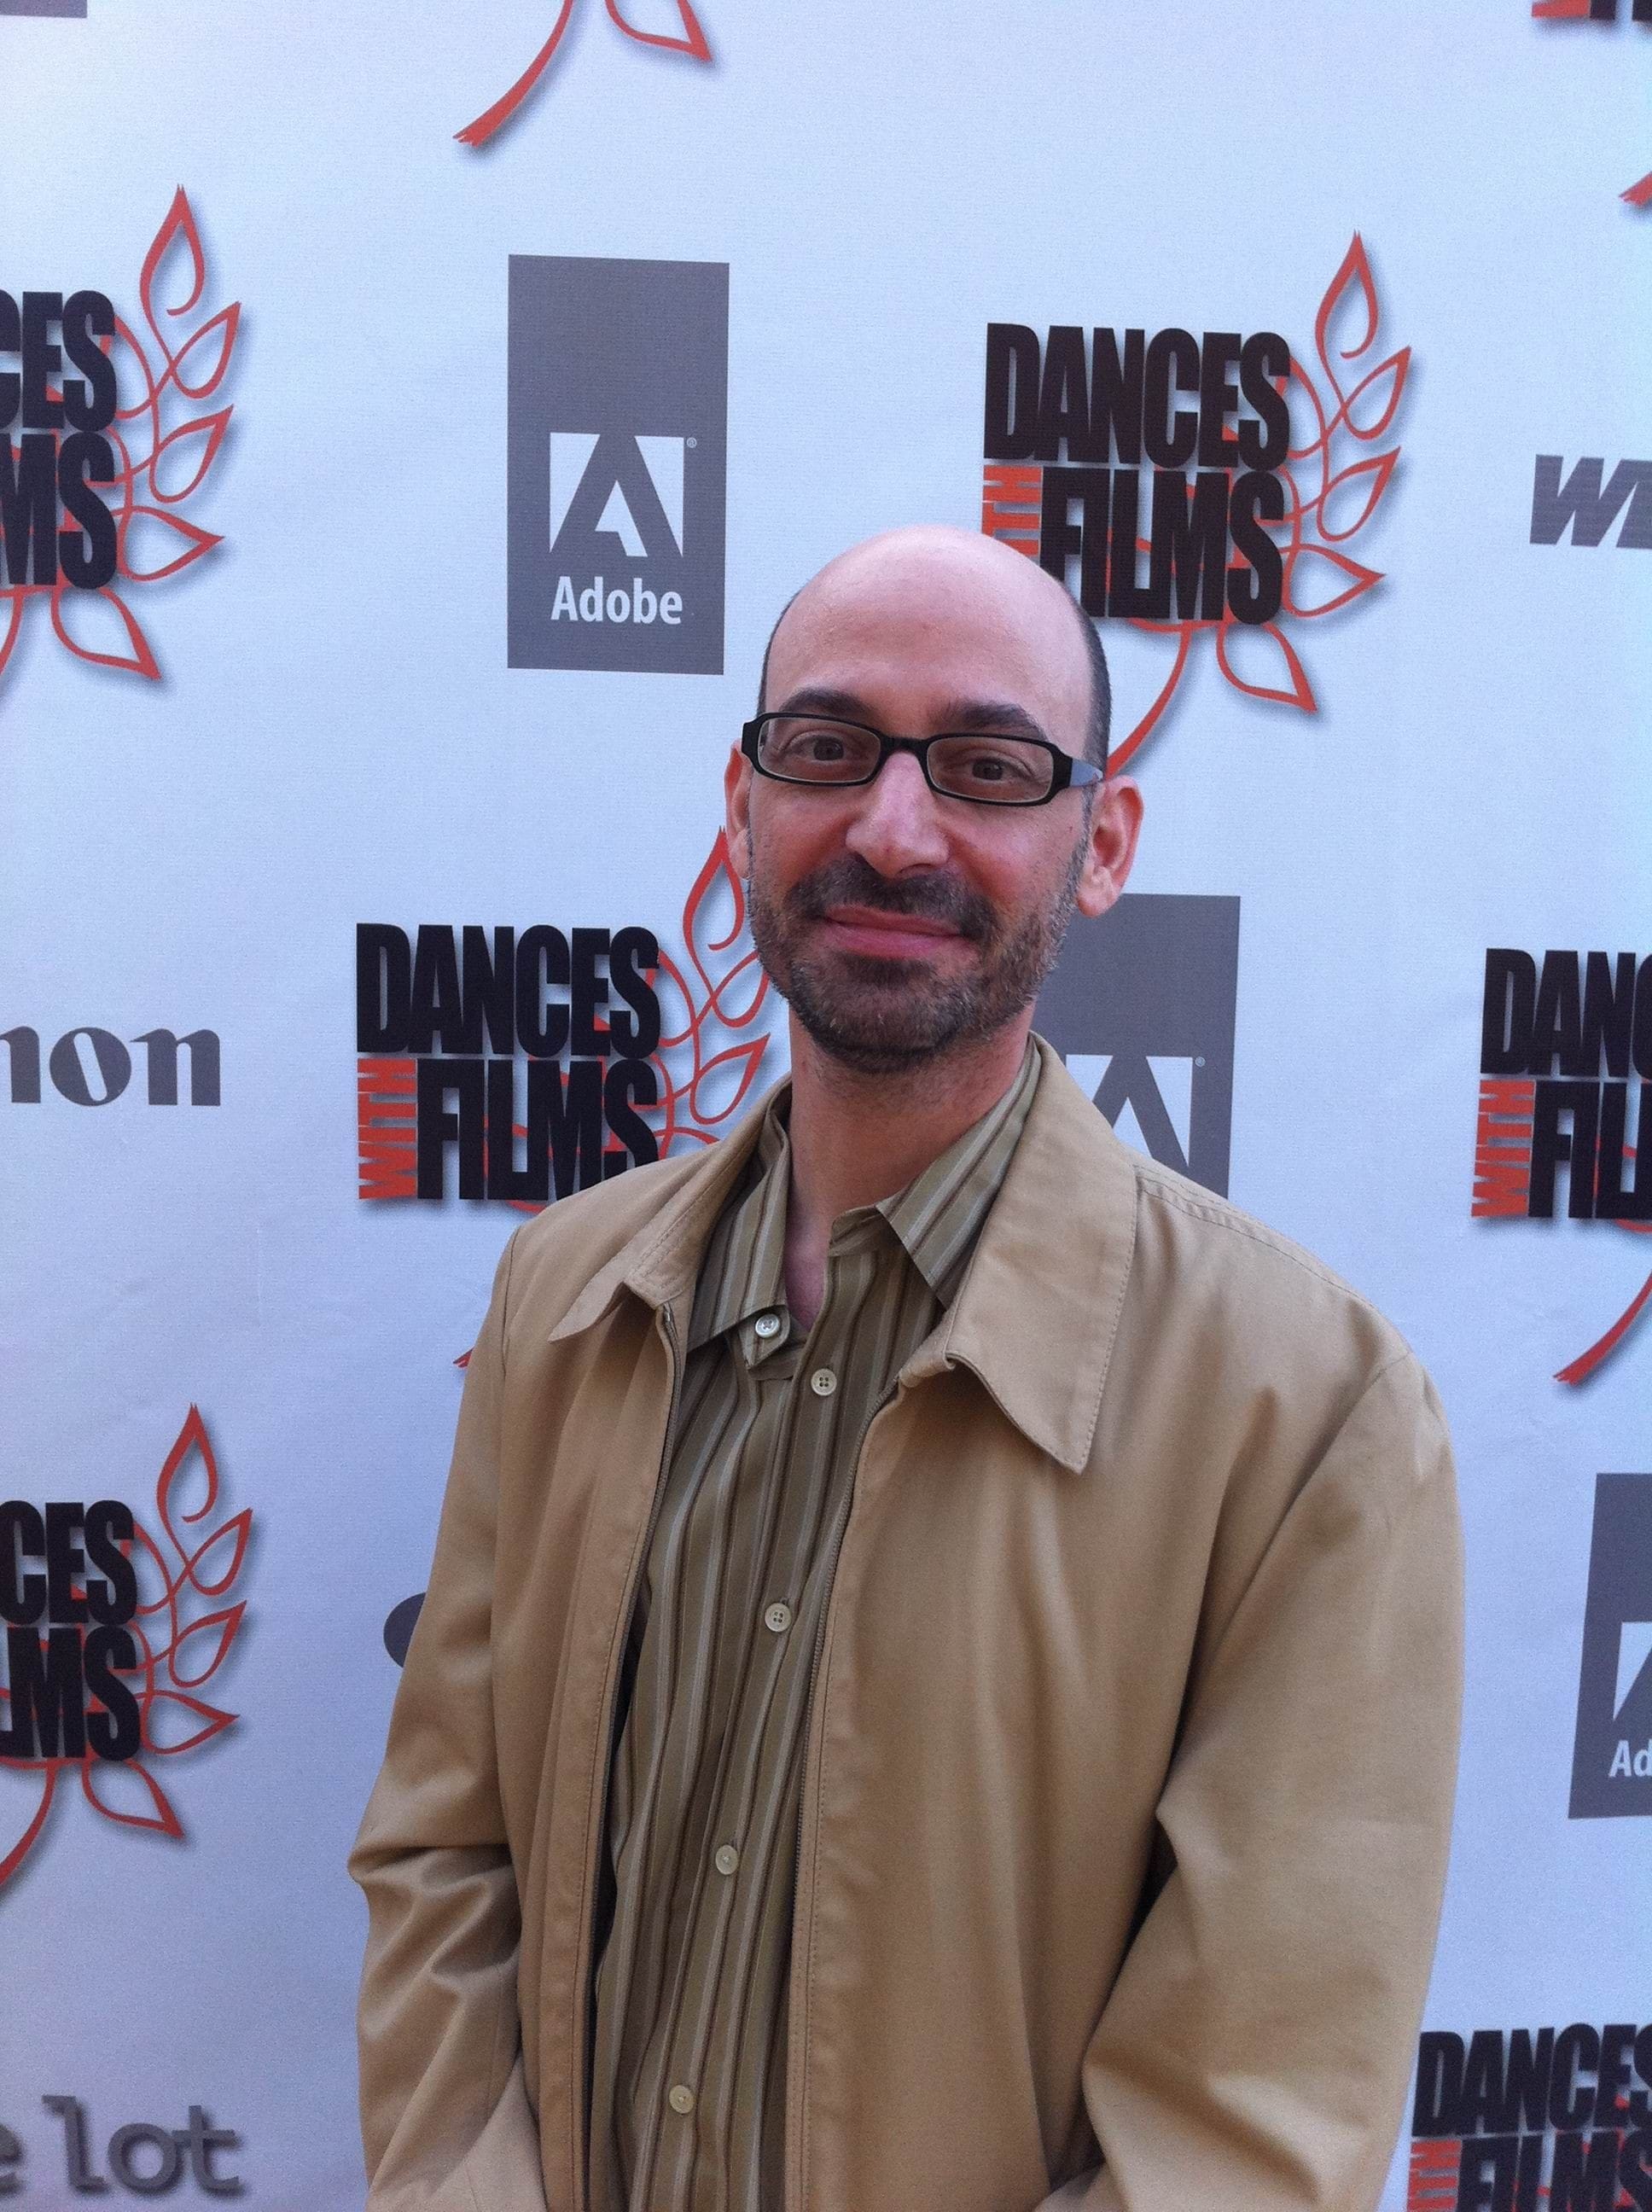 Actor Jeff Blumberg at the Dances with Films film festival, representing the movie The Comedian at The Friday